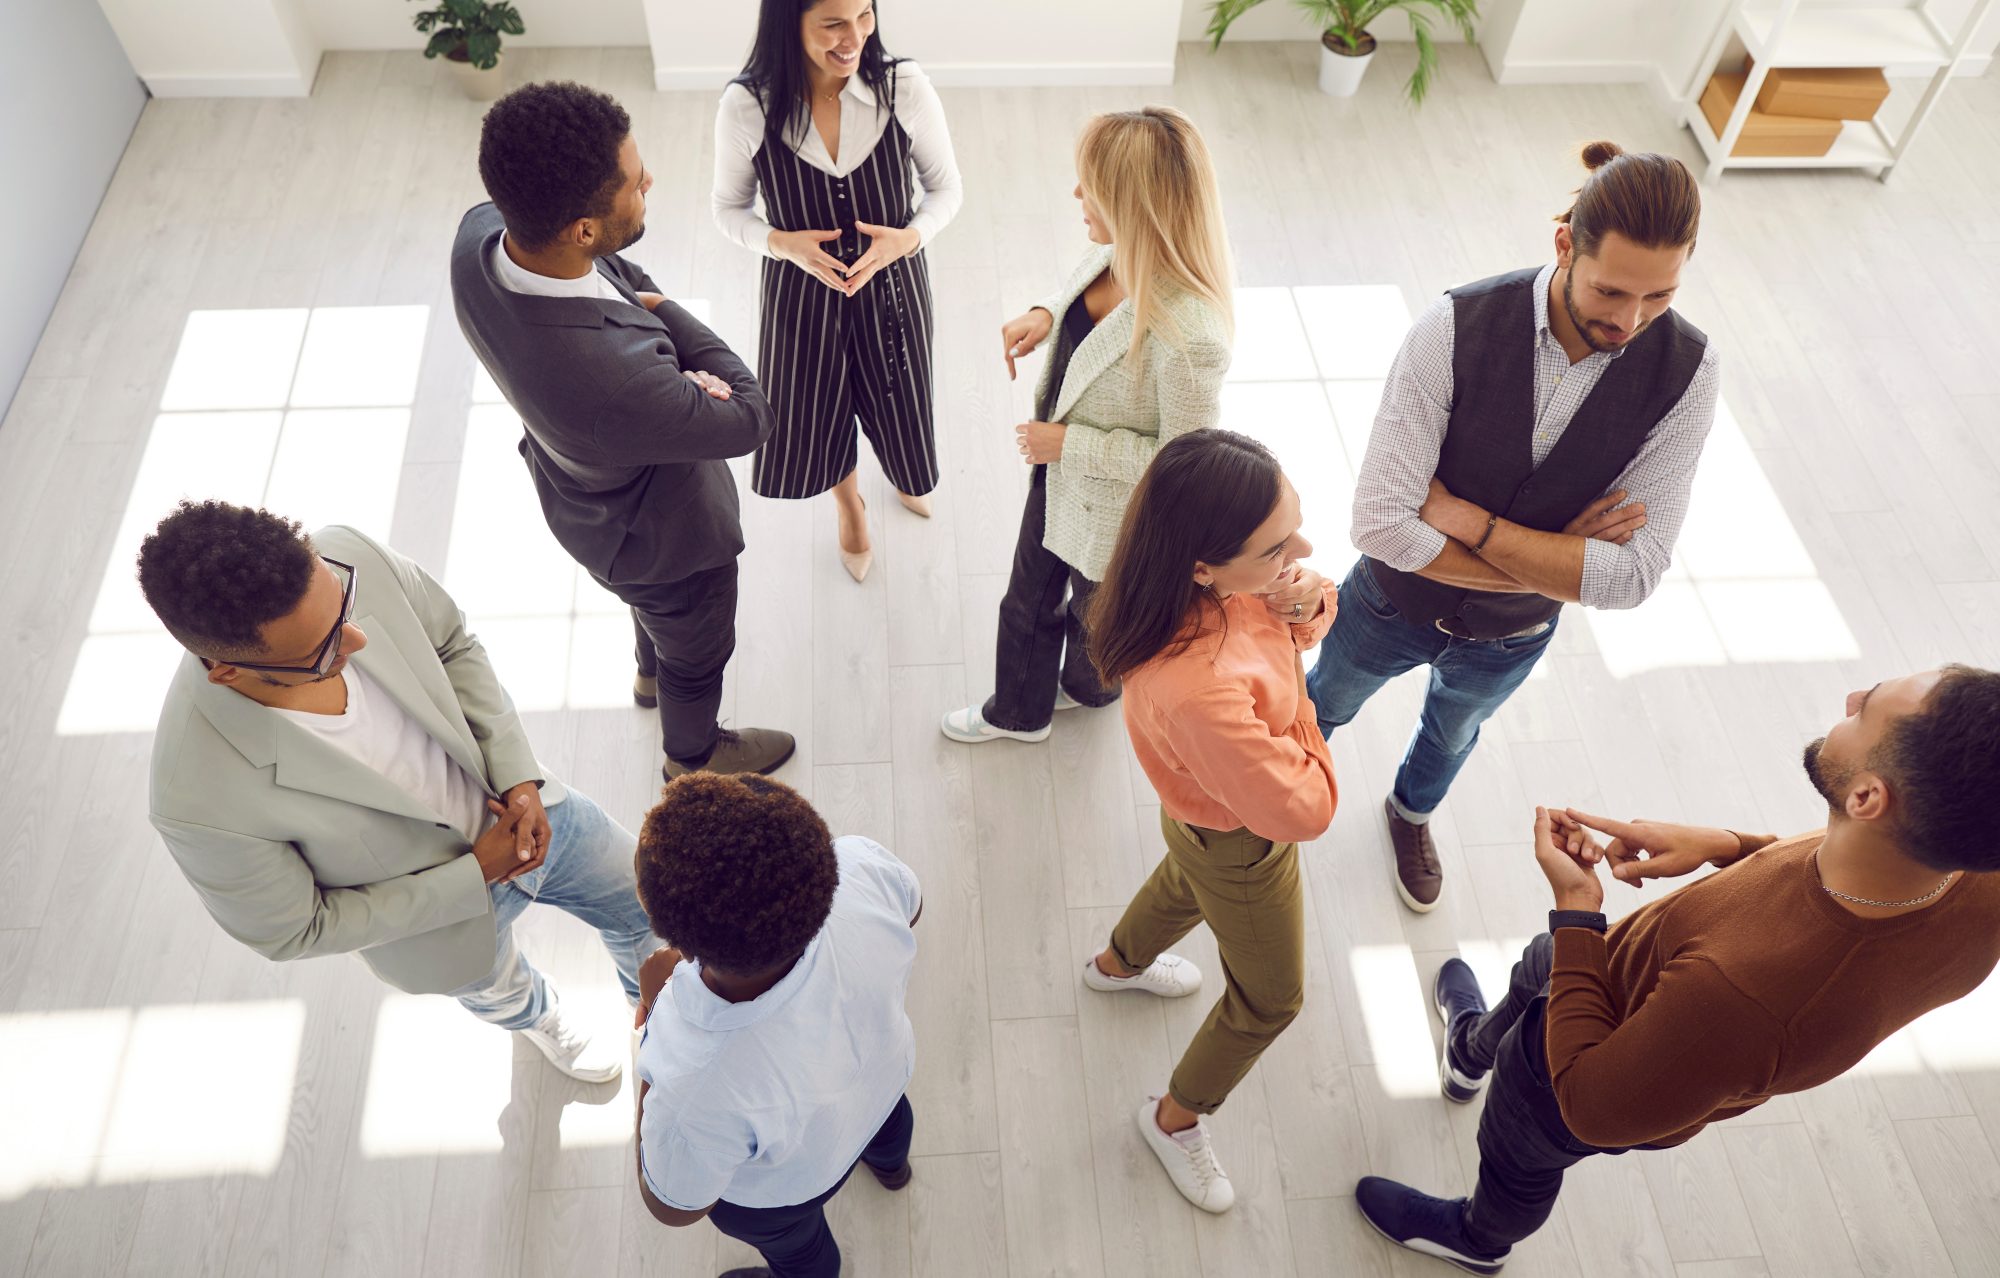 Group of diverse people communicating at business event